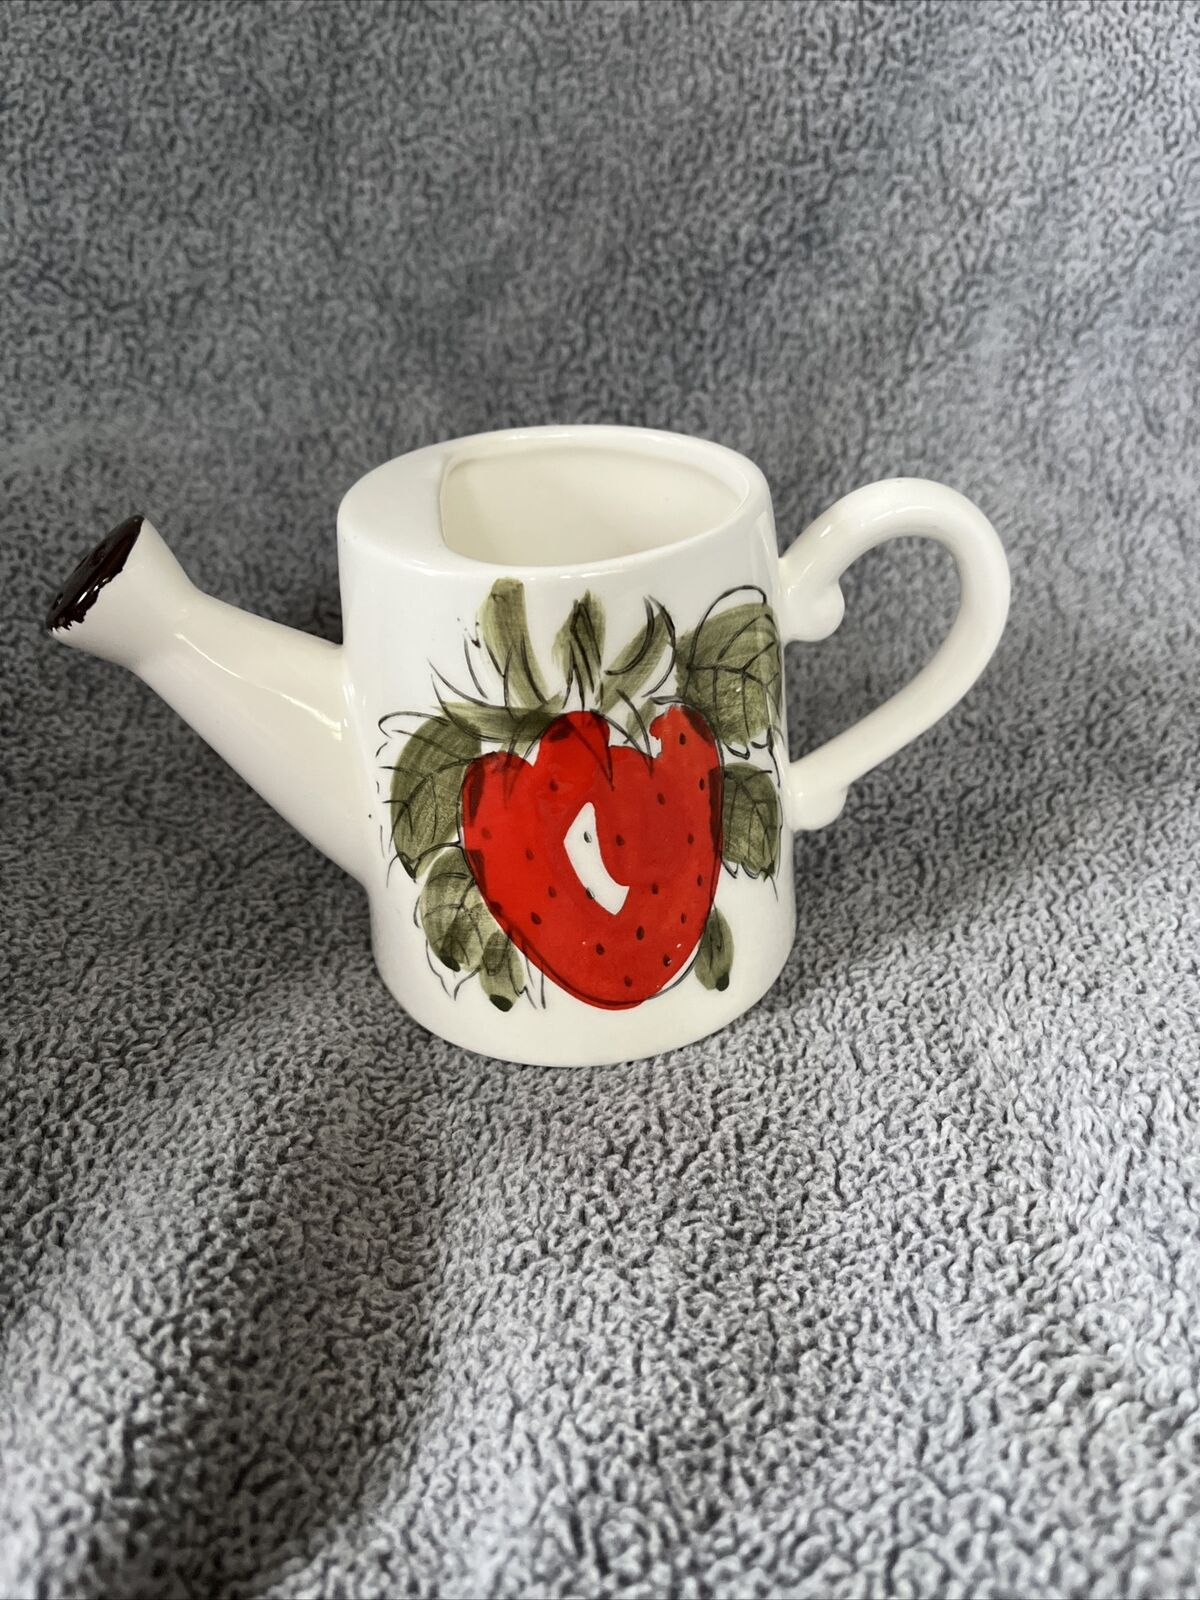 Vintage Lego Japan Mini Porcelain Watering Can  Jug Hand Painted Strawberry